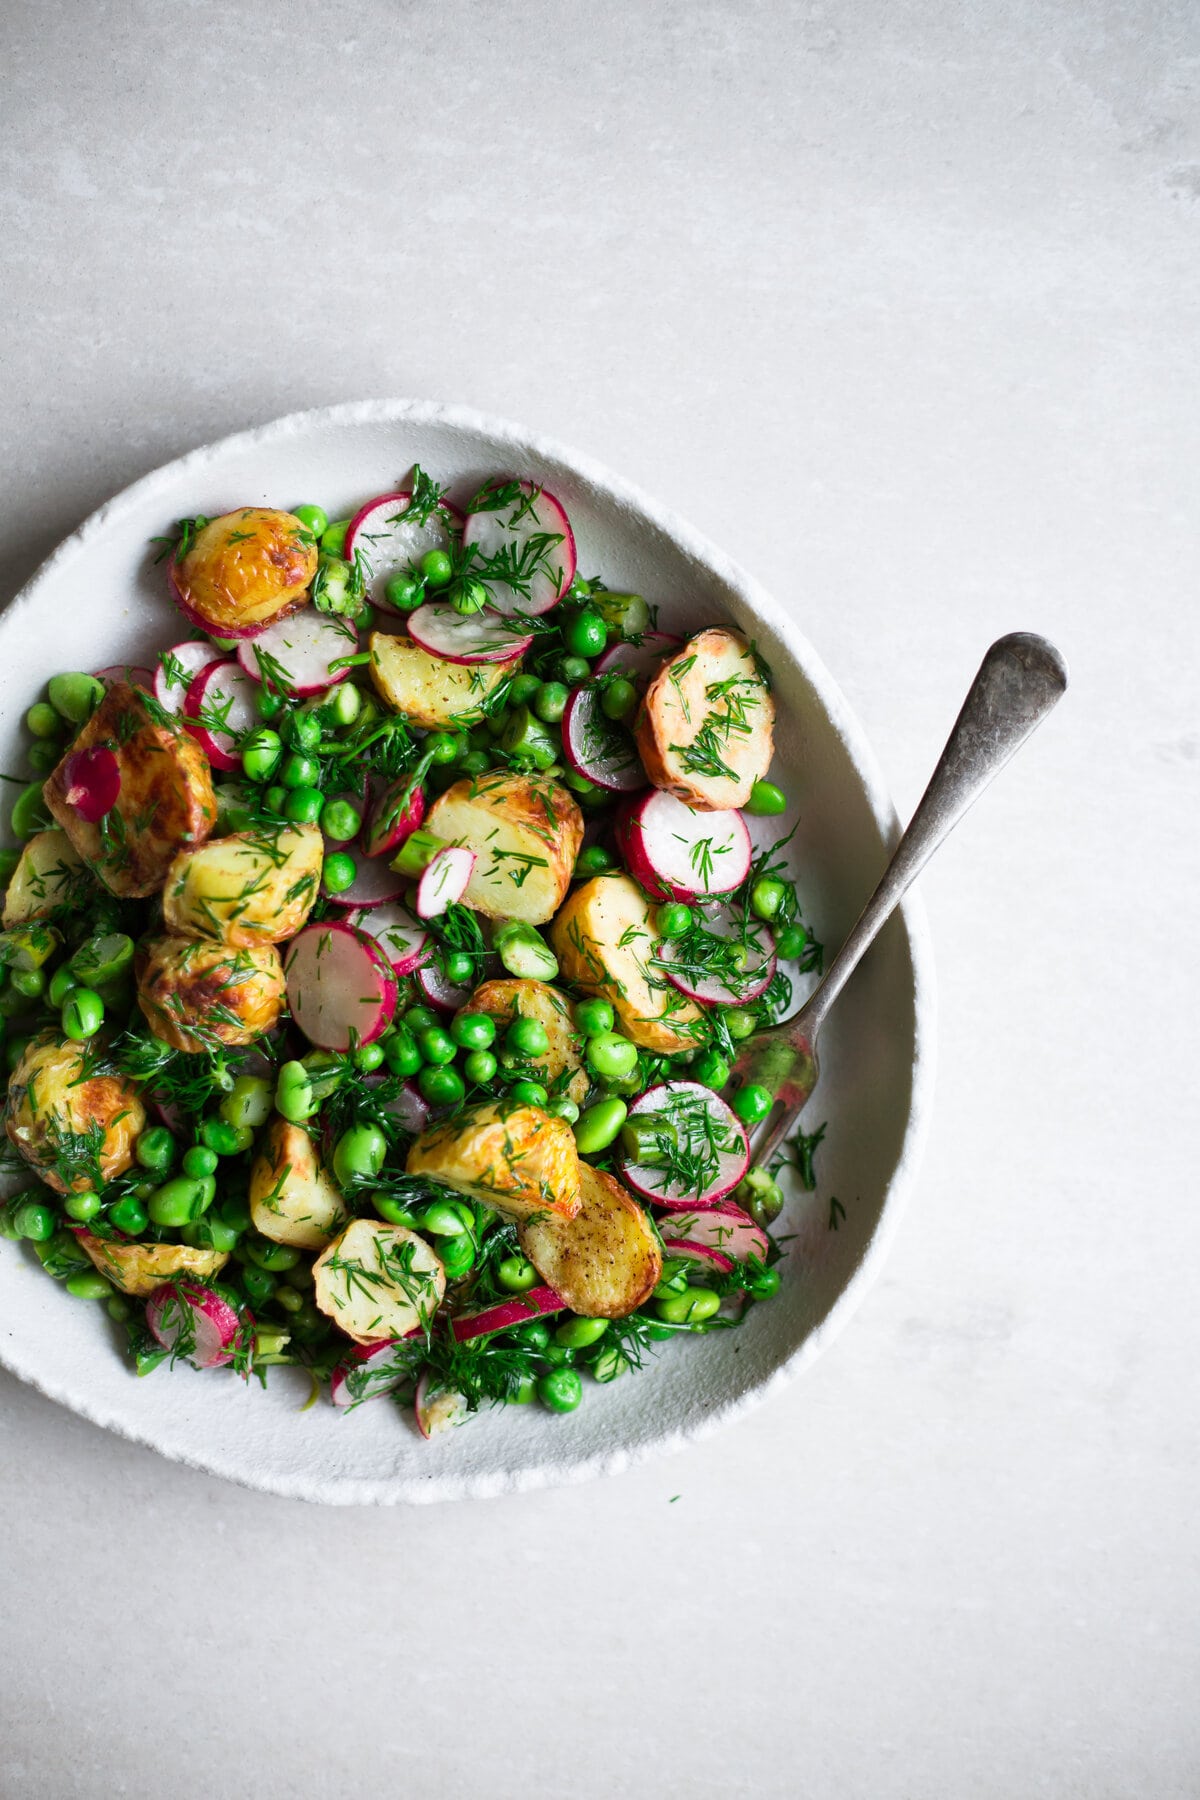 Vegan Spring Potato Salad - A Delicious, Healthy Salad that is low in Fat and packed full of goodness. Asparagus, Potatoes, Green Peas, Edamame, Dill and a Tangy Dressing. Ready in under 30 minutes. Vegan/Gluten Free. #vegan #potatosalad #glutenfree #healthy 